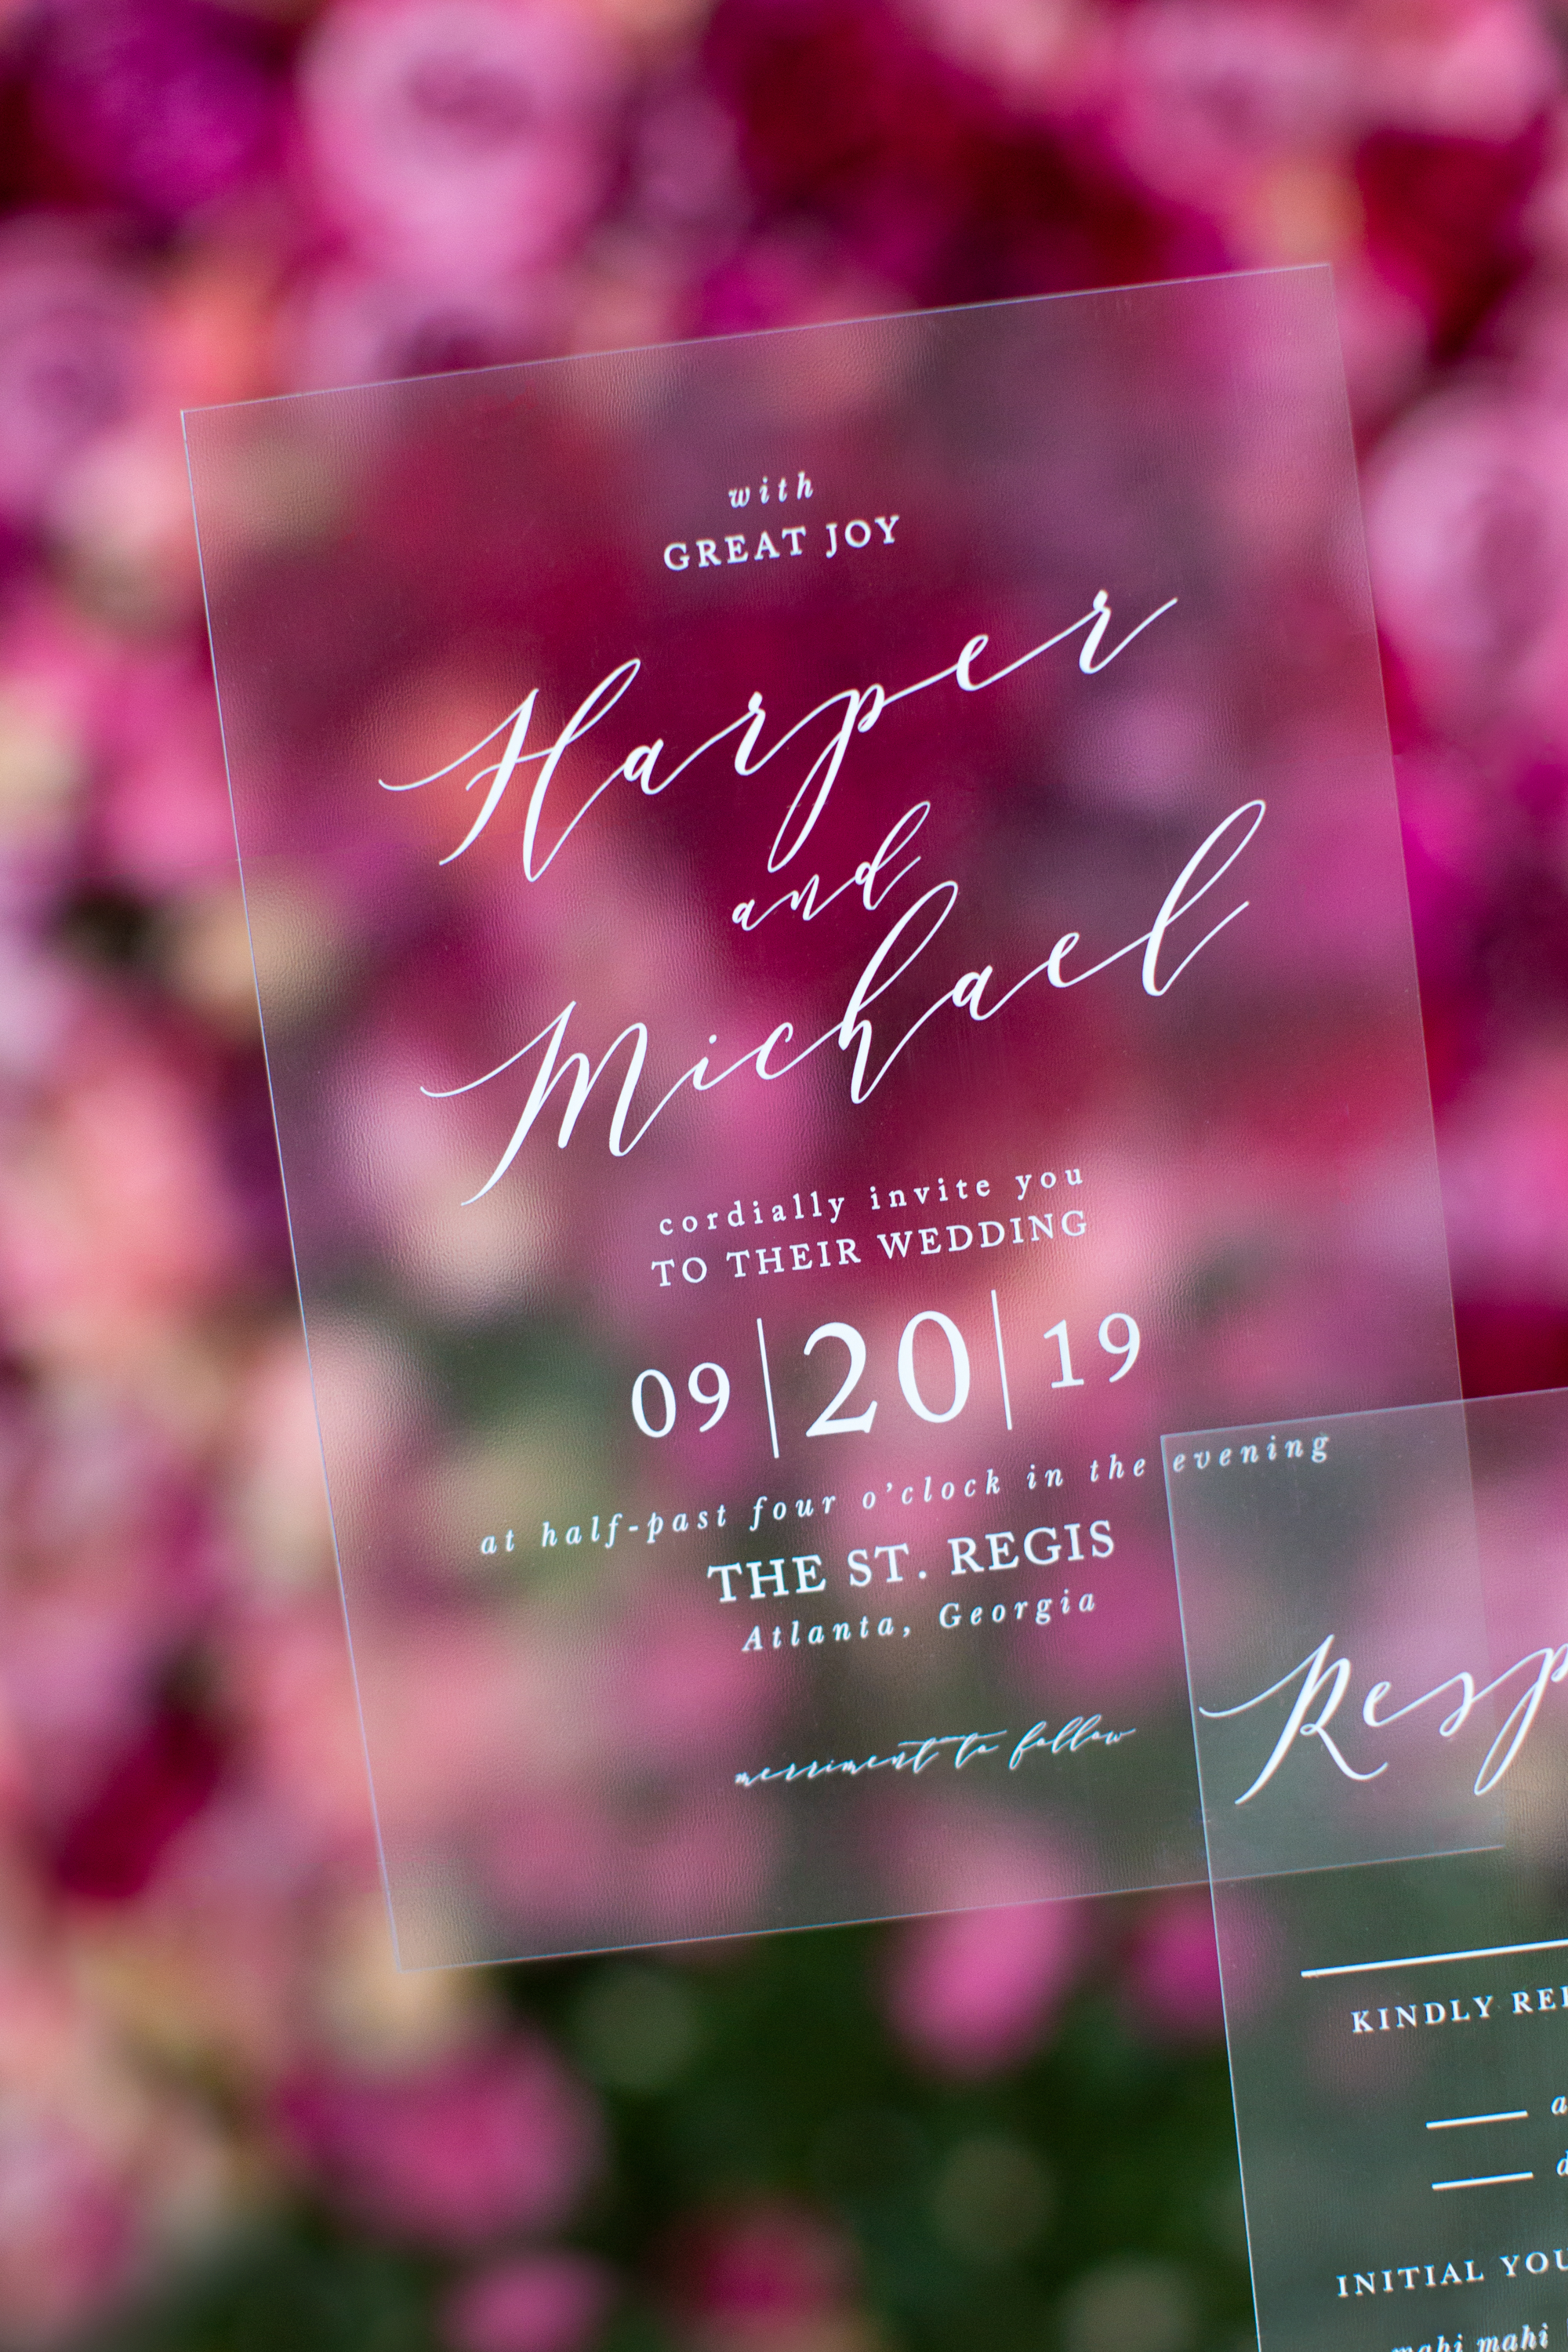 Clear wedding invitations are on trend and it's easy to see why!